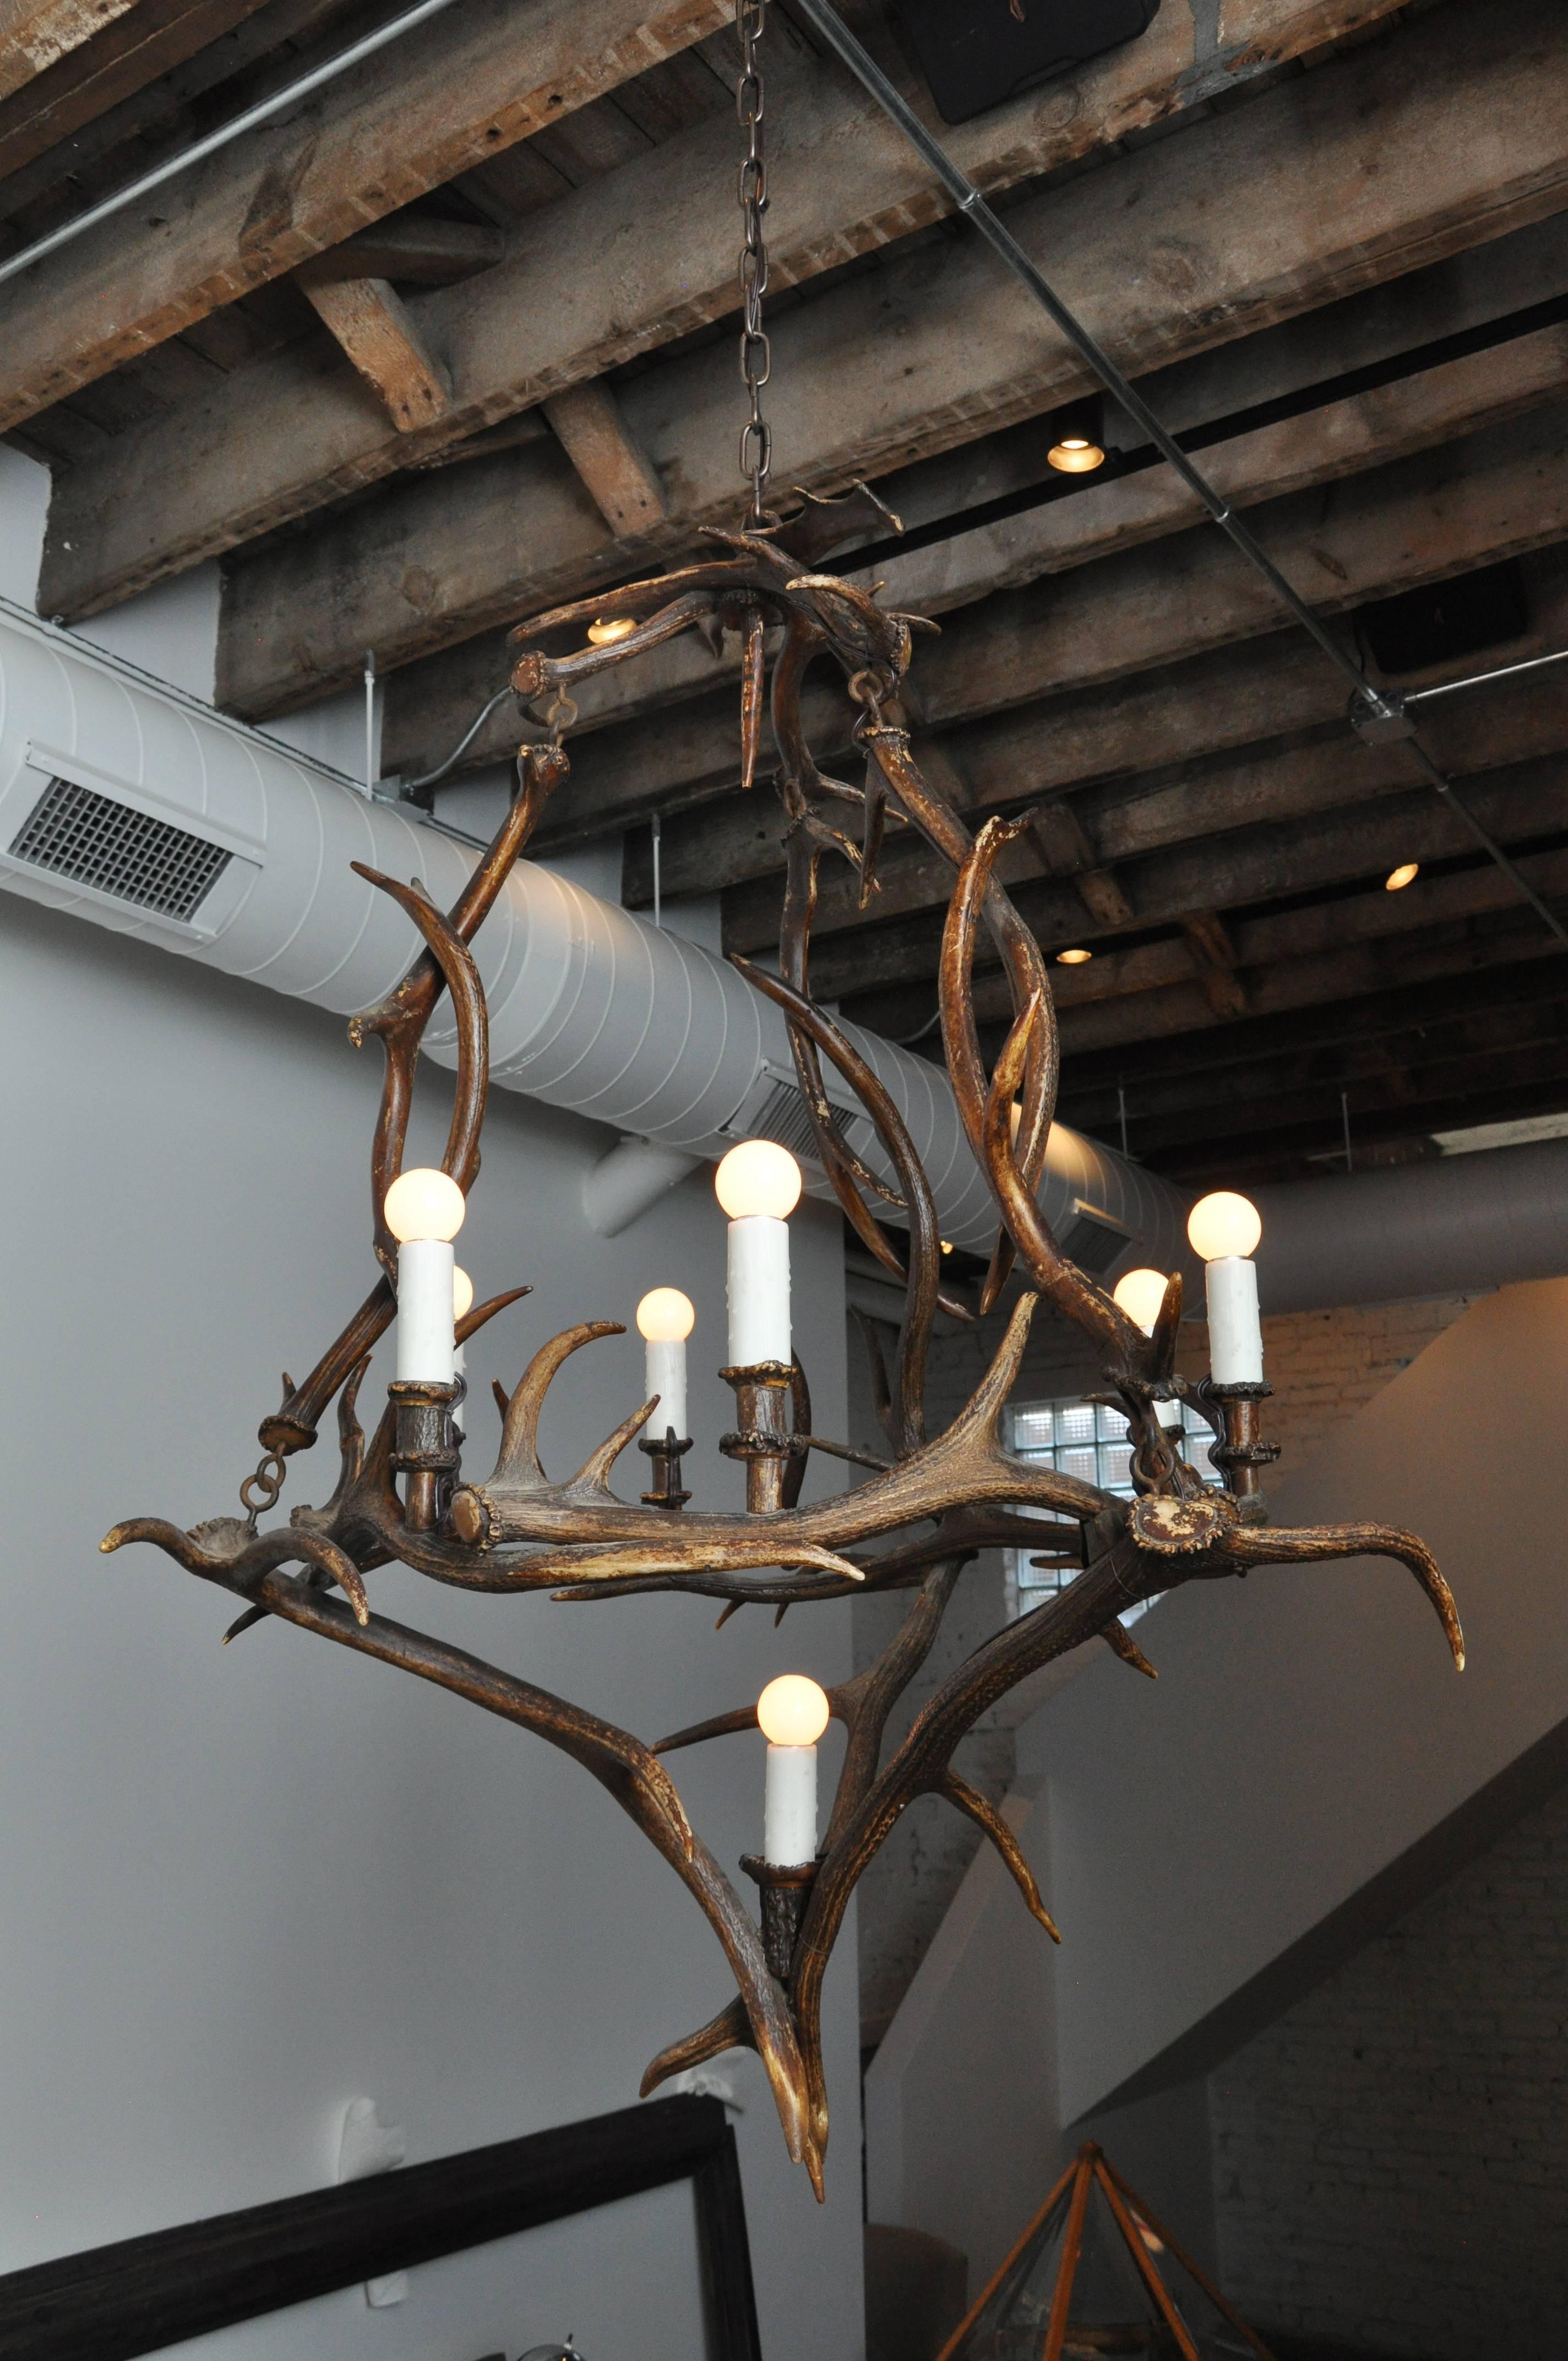 18th Century Bavarian Antler Chandelier Found in Germany
This well proportioned, excellent authentic Antler Chandelier was found in a hunting lodge in the region of Bavaria, Germany.  This is a handsome and stellar example of original antler